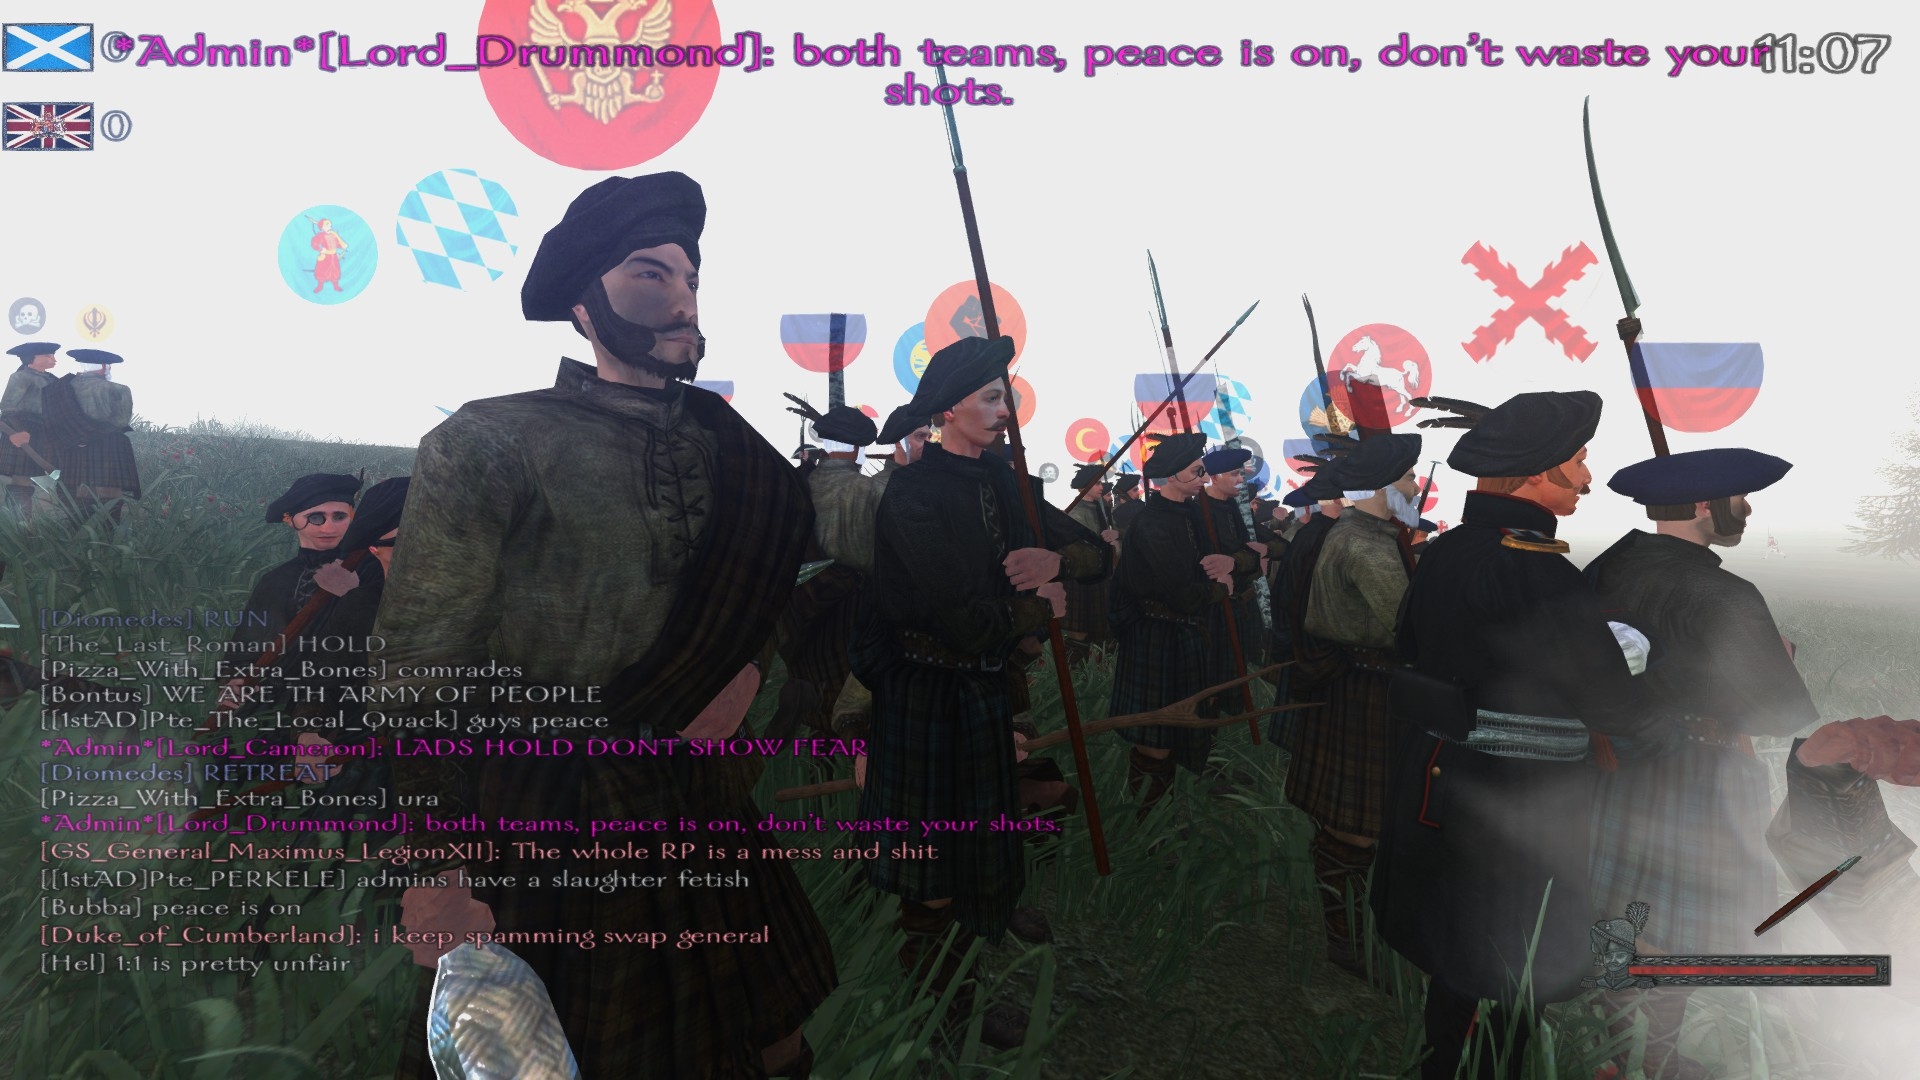 Jacobite Uprising Event - Battle of Culloden